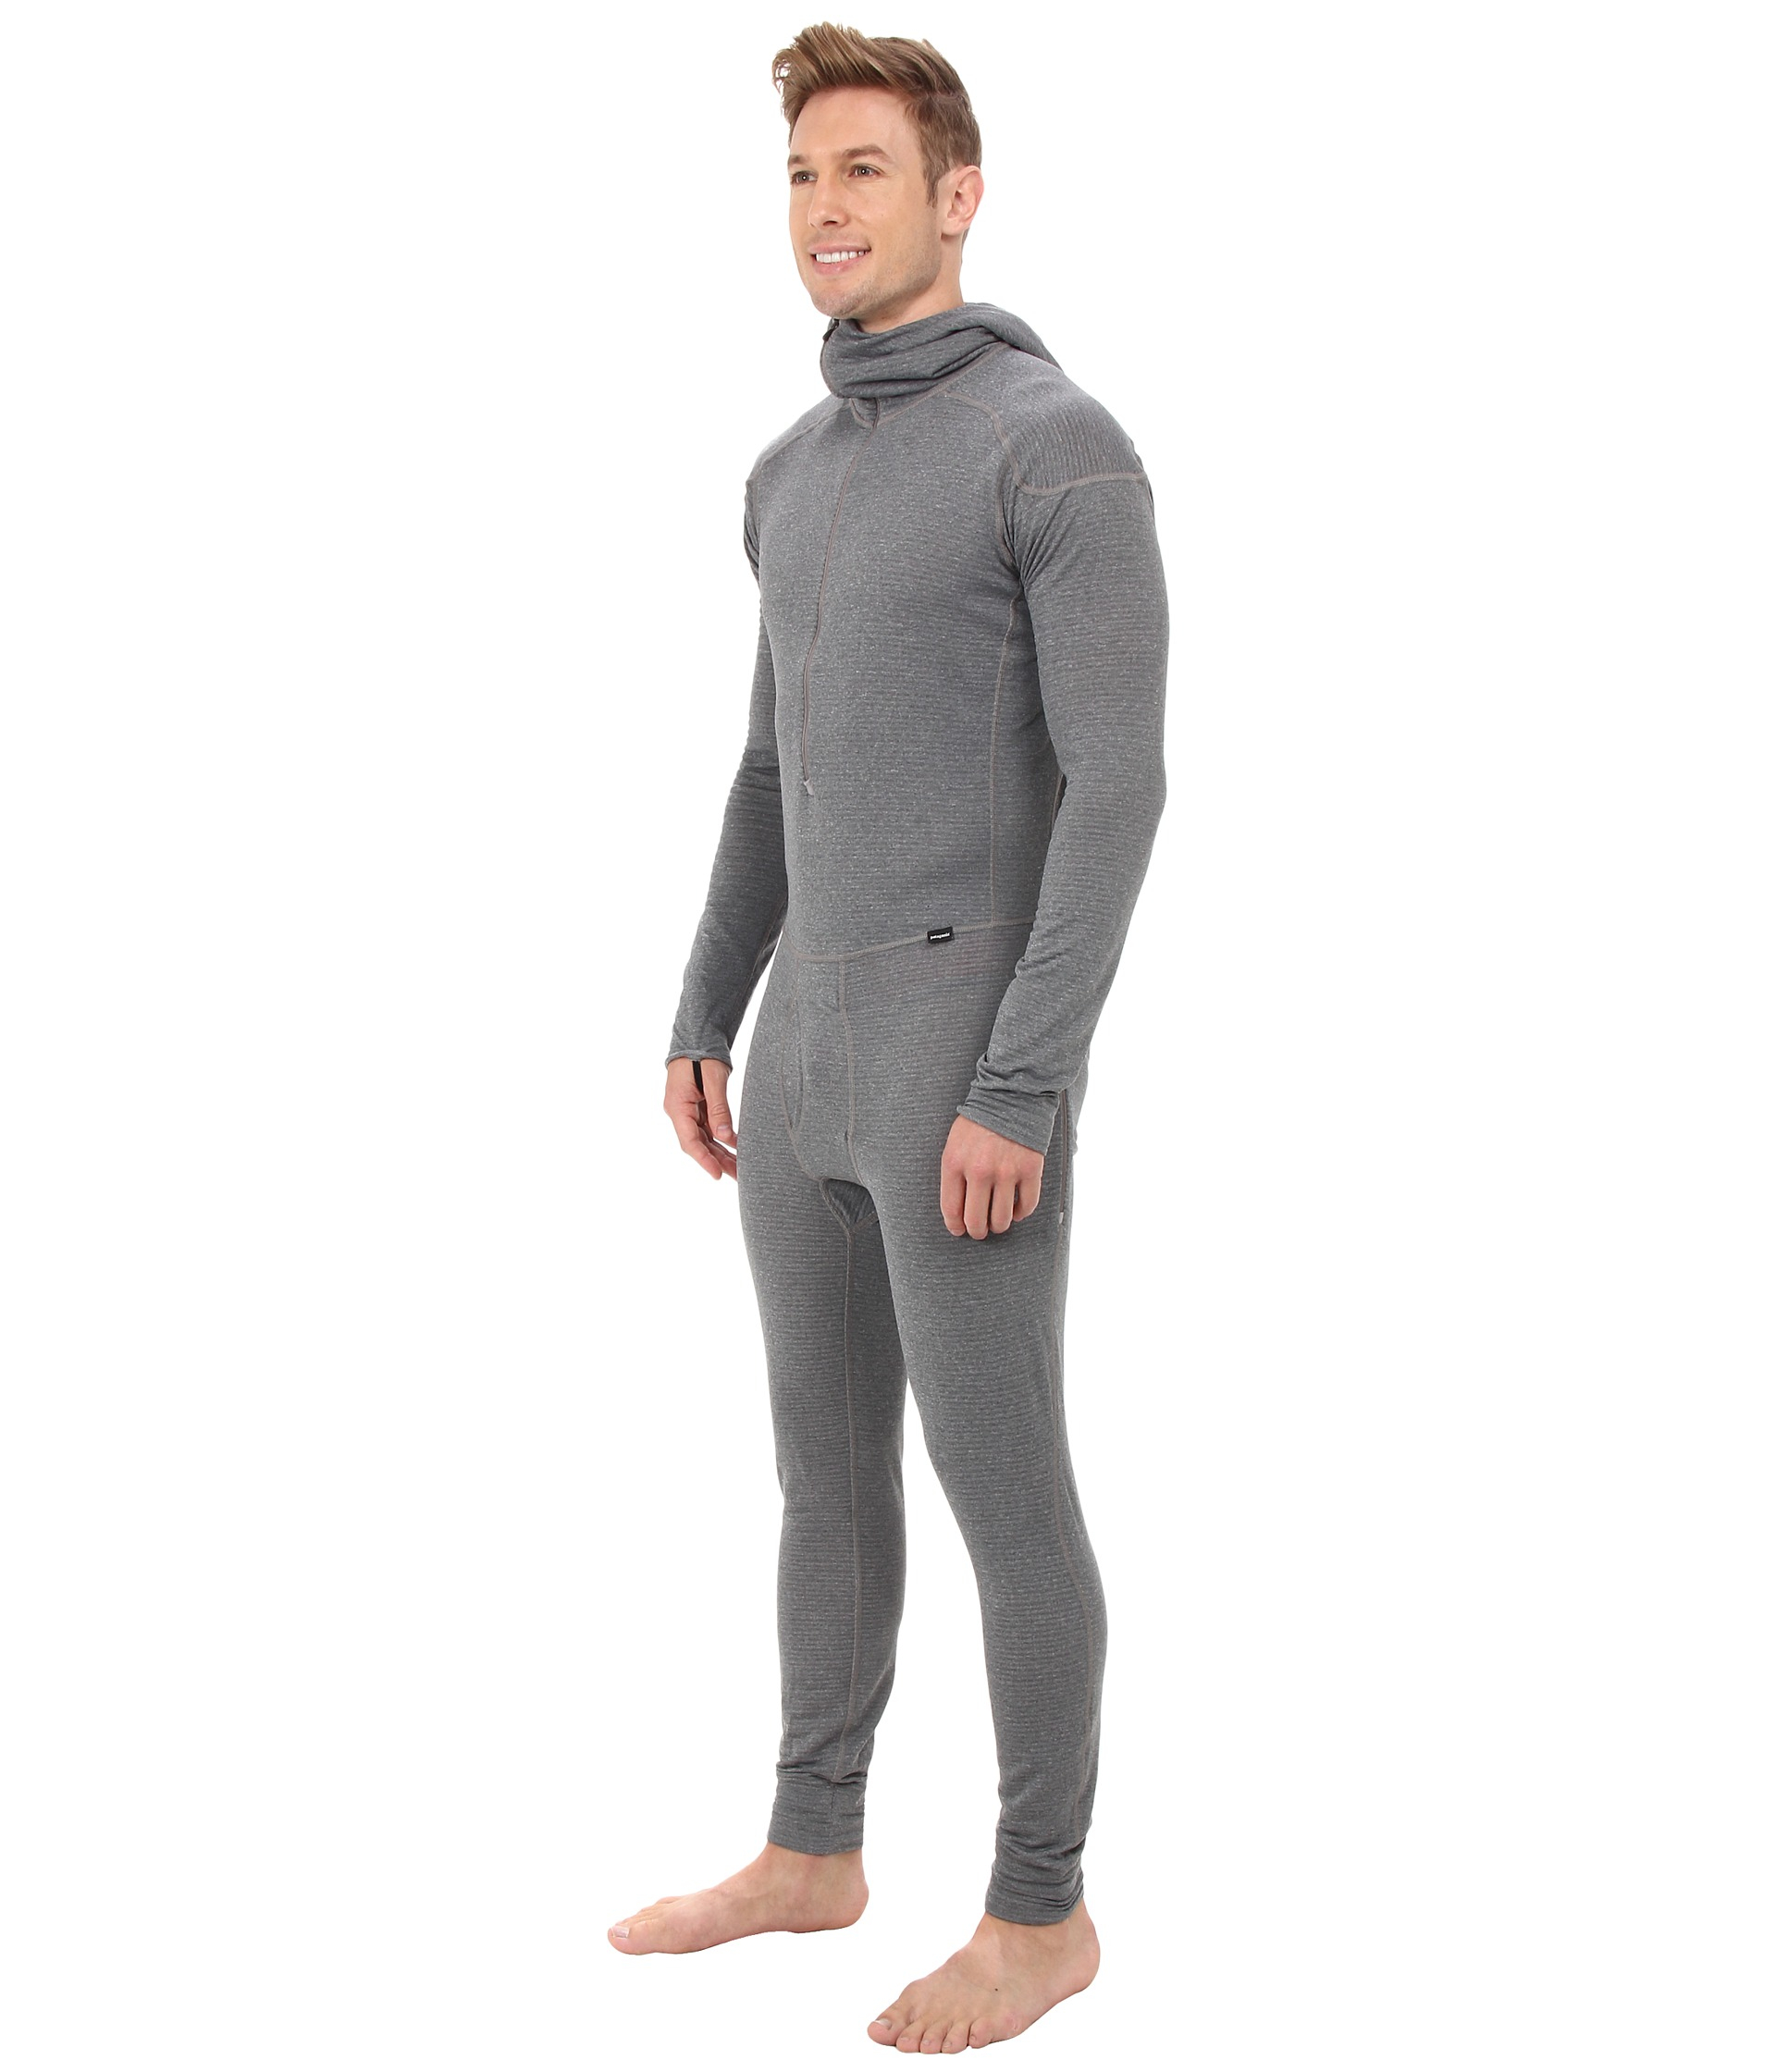 patagonia expedition weight long underwear,Quality  assurance,protein-burger.com